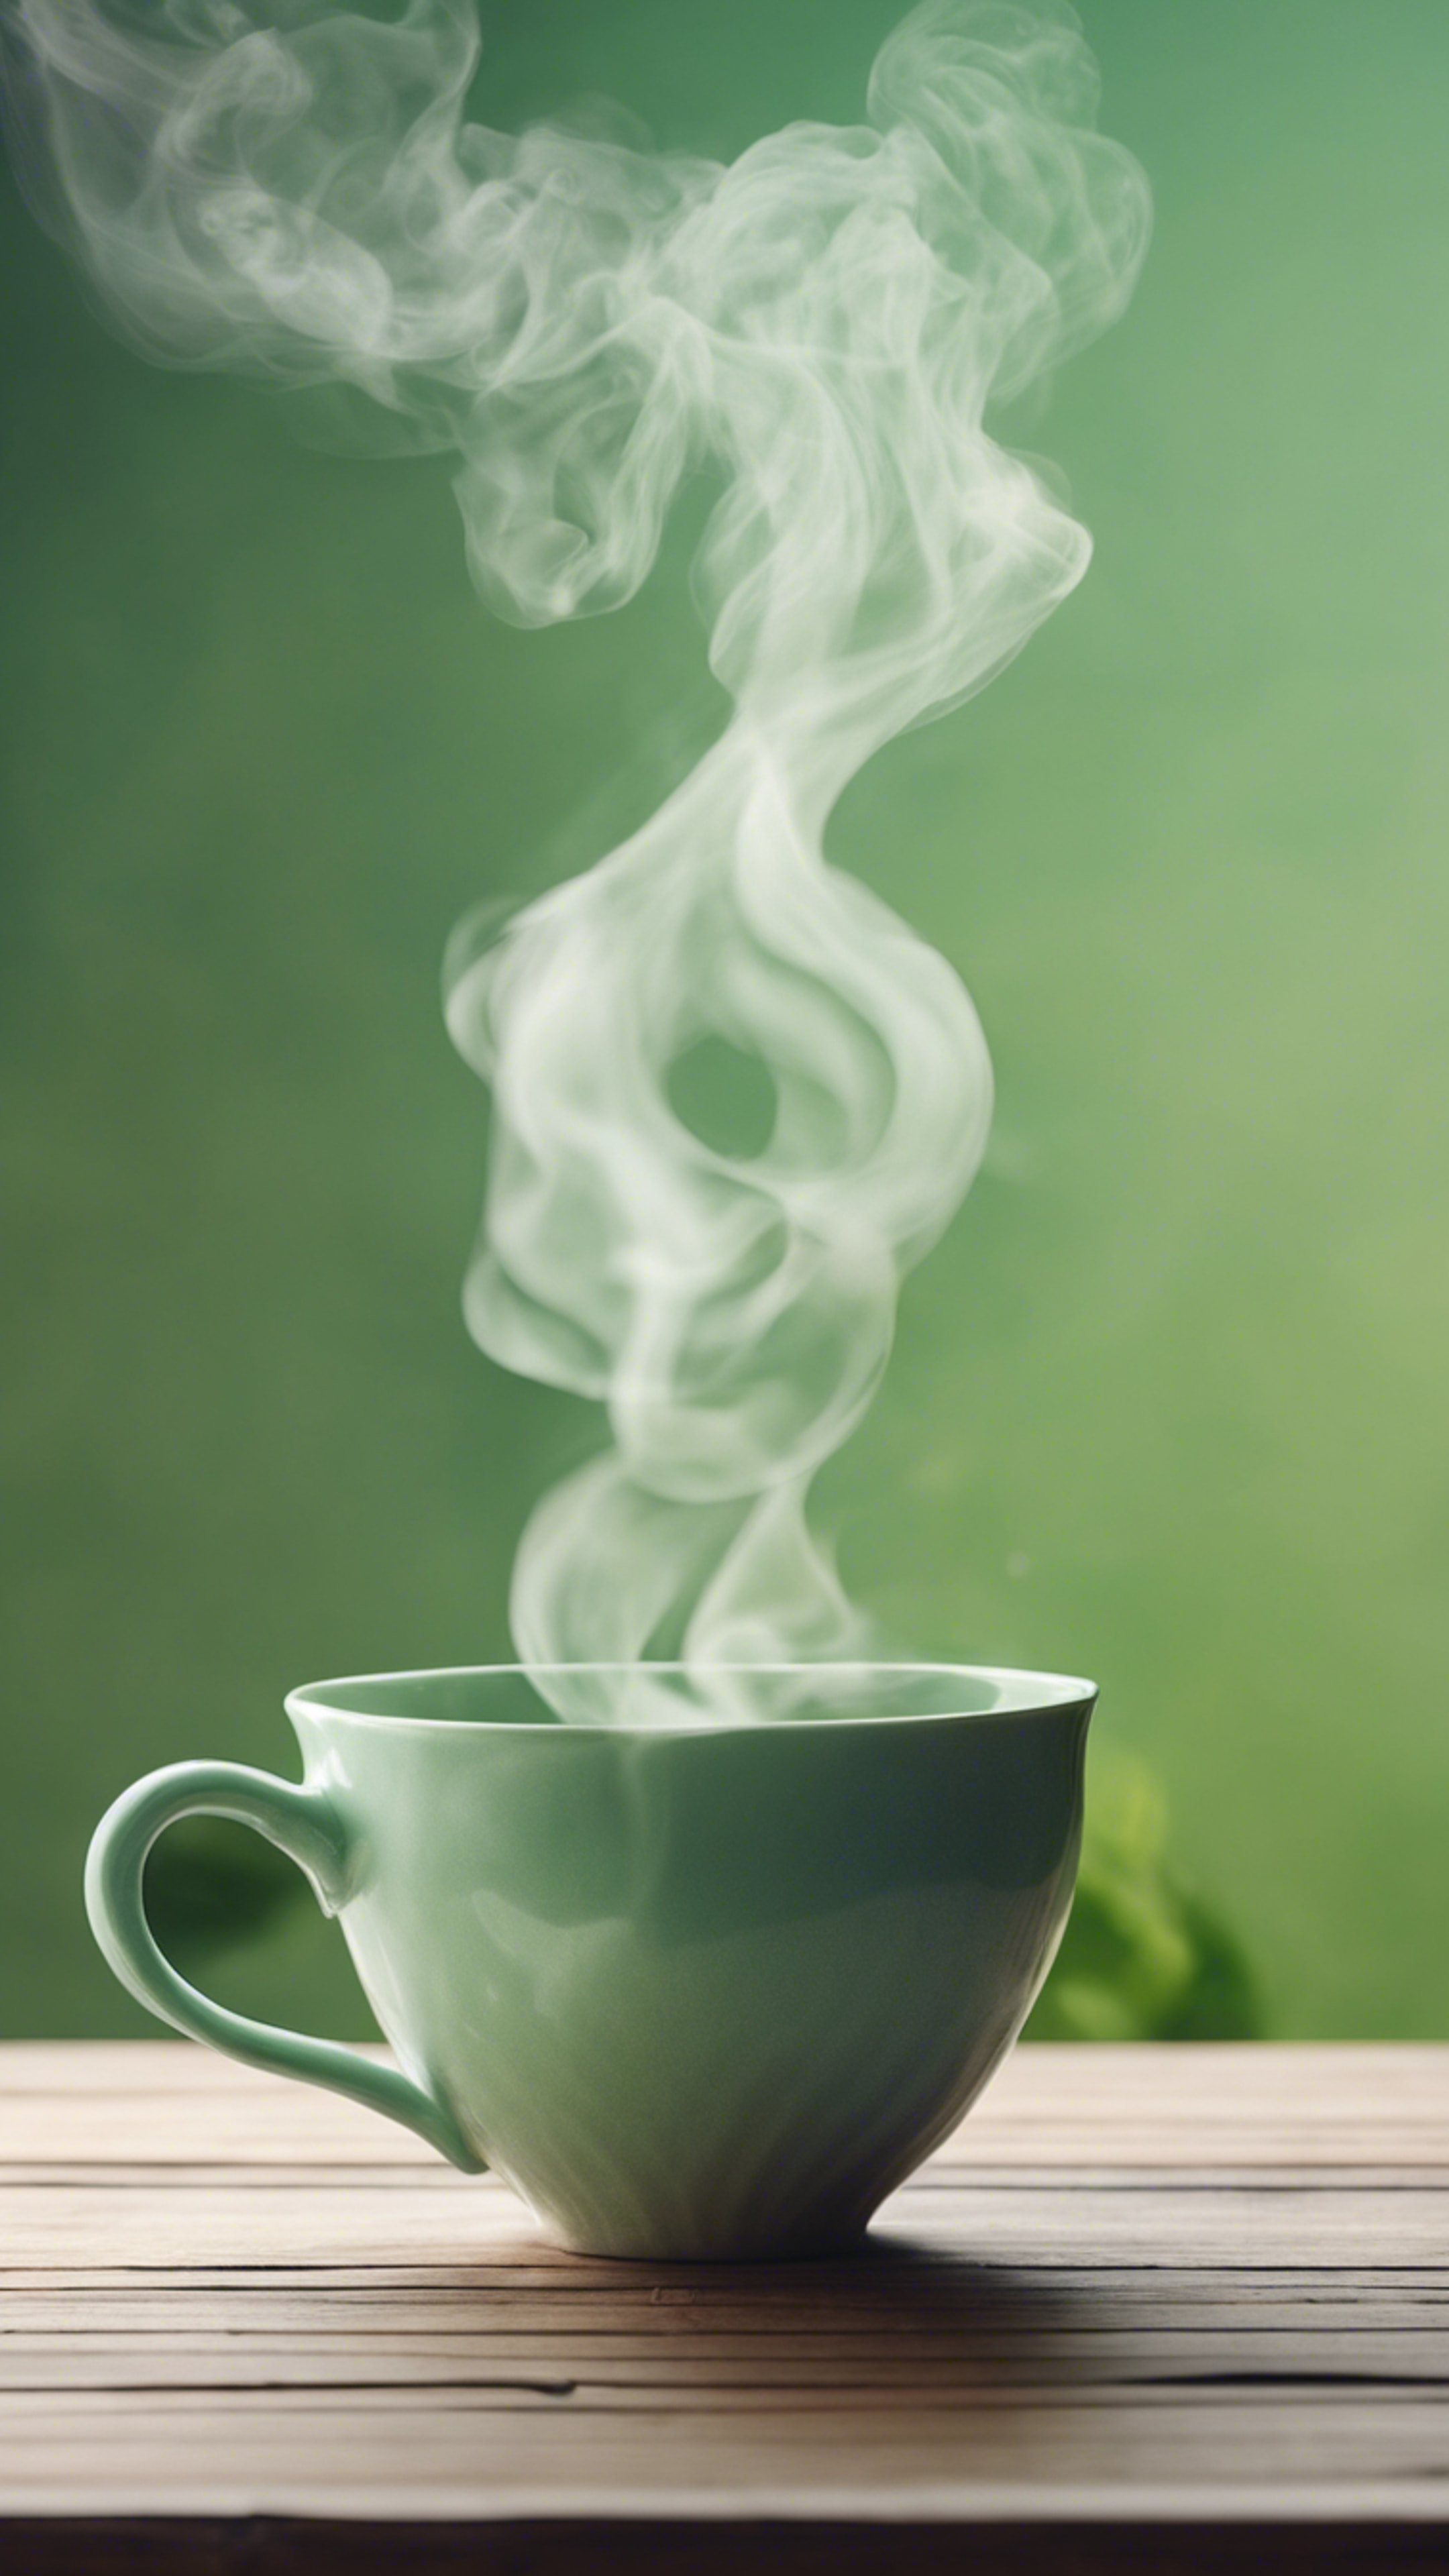 A peaceful mint green tea cup steaming on a cozy wooden table. Wallpaper[31272e7066f044f48a95]